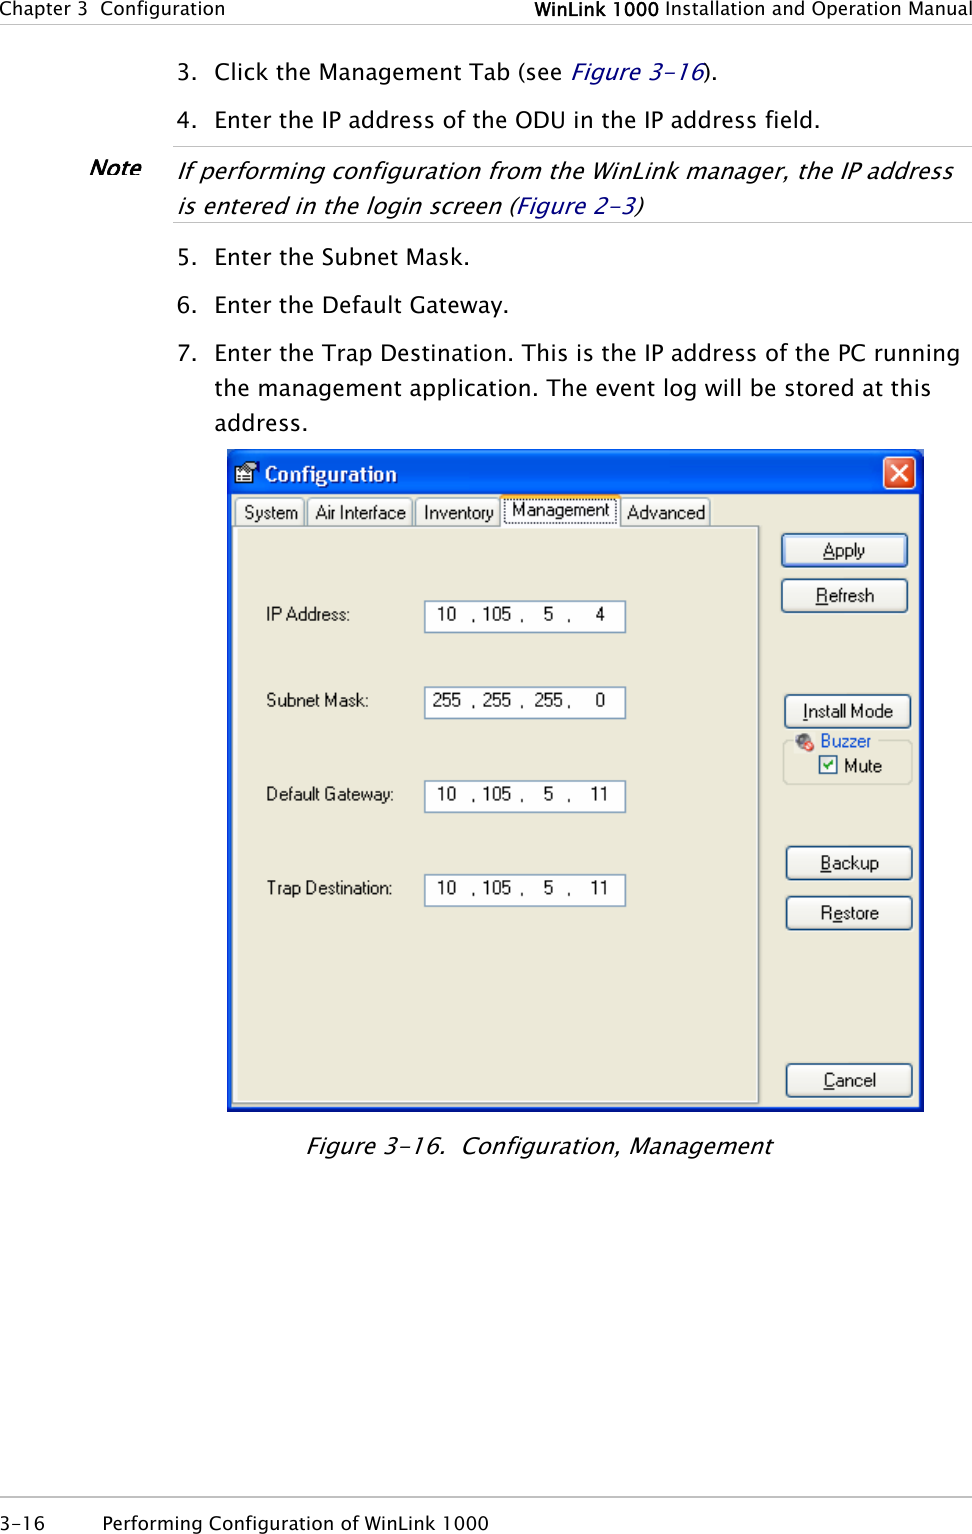 Chapter 3  Configuration  WinLink 1000 Installation and Operation Manual 3. Click the Management Tab (see Figure 3-16). 4. Enter the IP address of the ODU in the IP address field.  If performing configuration from the WinLink manager, the IP address is entered in the login screen (Figure 2-3)  Note5. Enter the Subnet Mask. 6. Enter the Default Gateway. 7. Enter the Trap Destination. This is the IP address of the PC running the management application. The event log will be stored at this address.  Figure 3-16.  Configuration, Management 3-16  Performing Configuration of WinLink 1000  